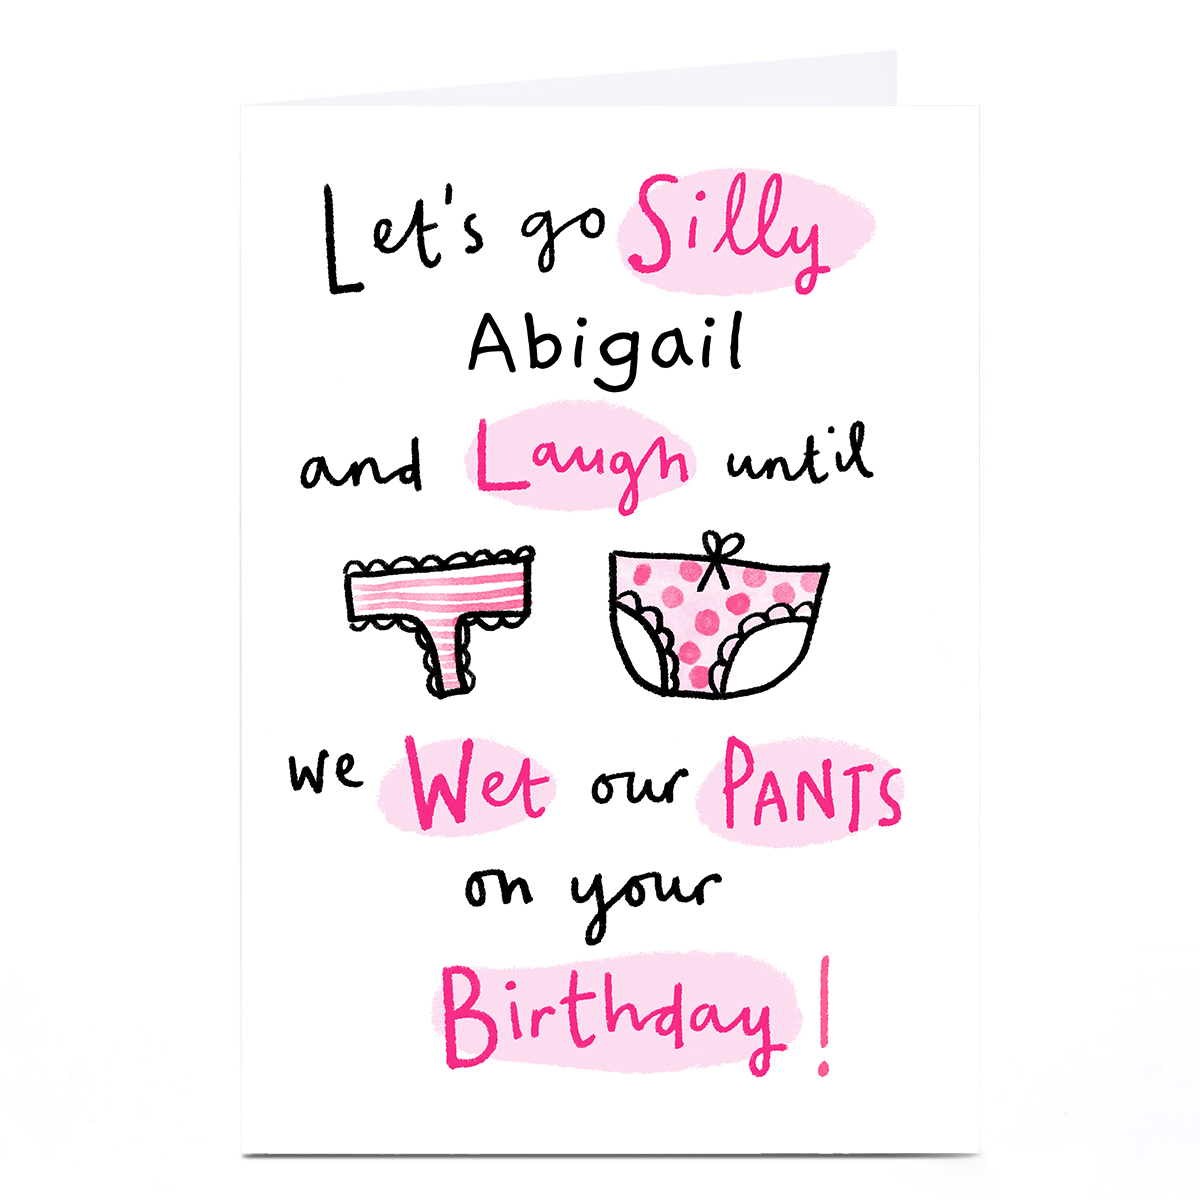 Personalised Lindsay Kirby Birthday Card - Wet Our Pants